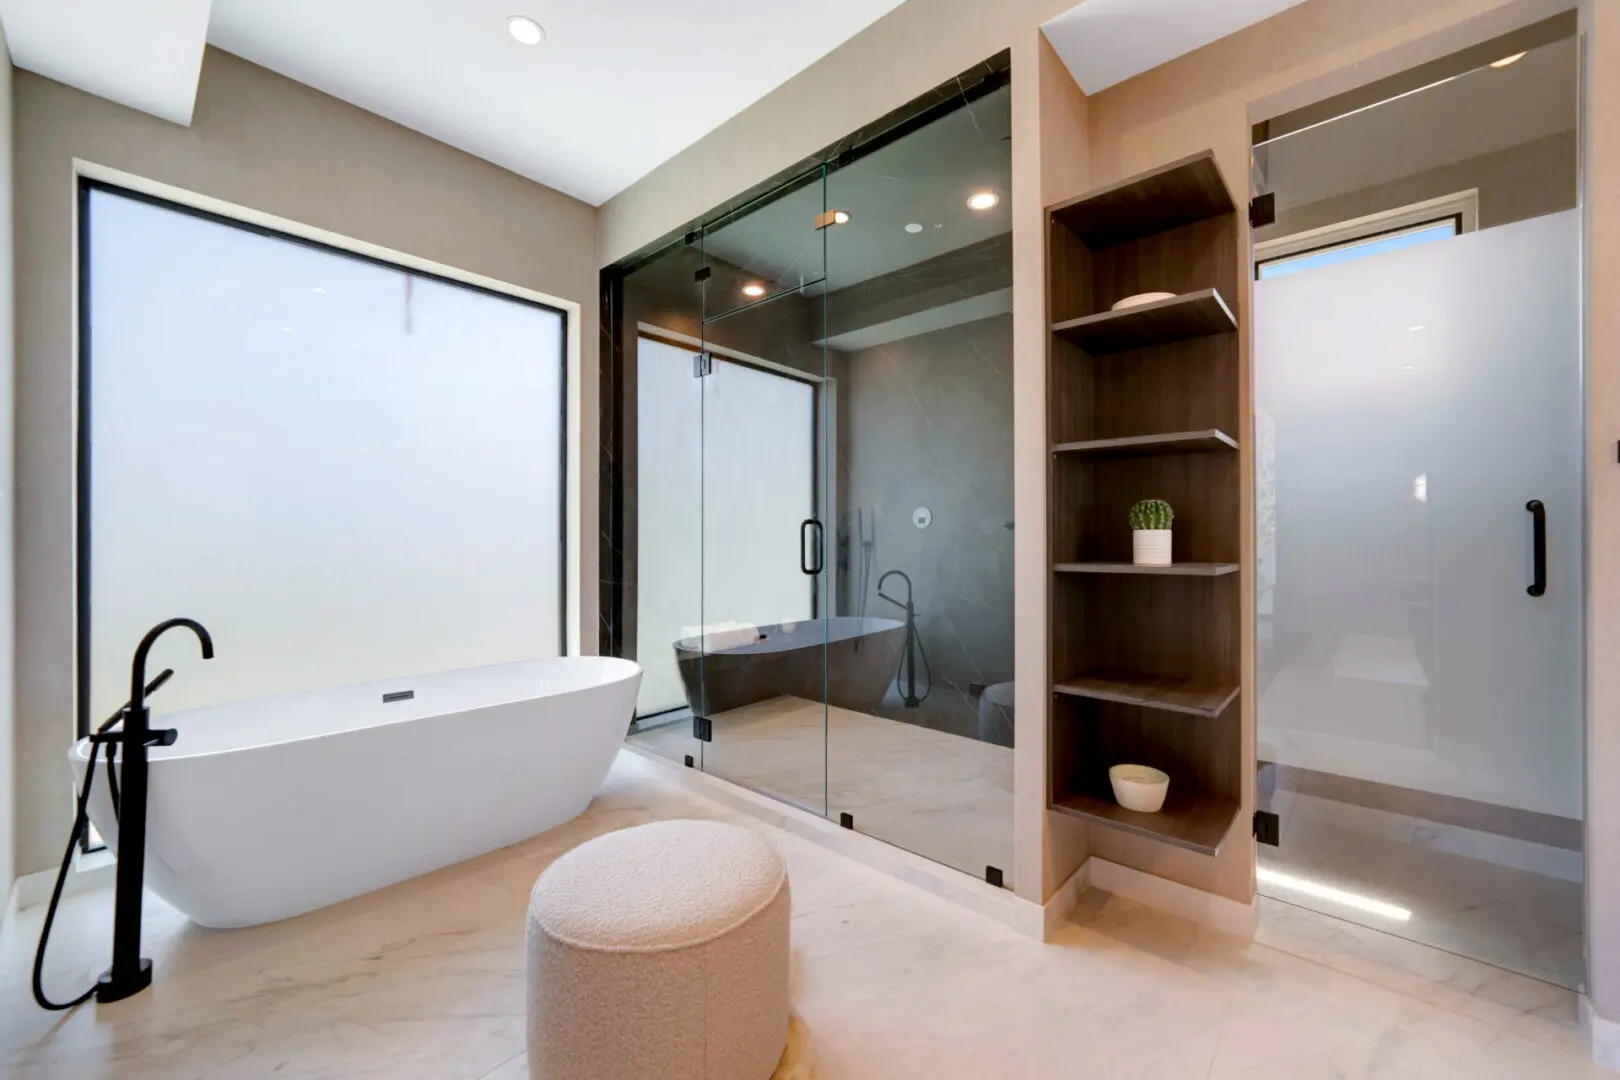 A shower room and the corner storage space